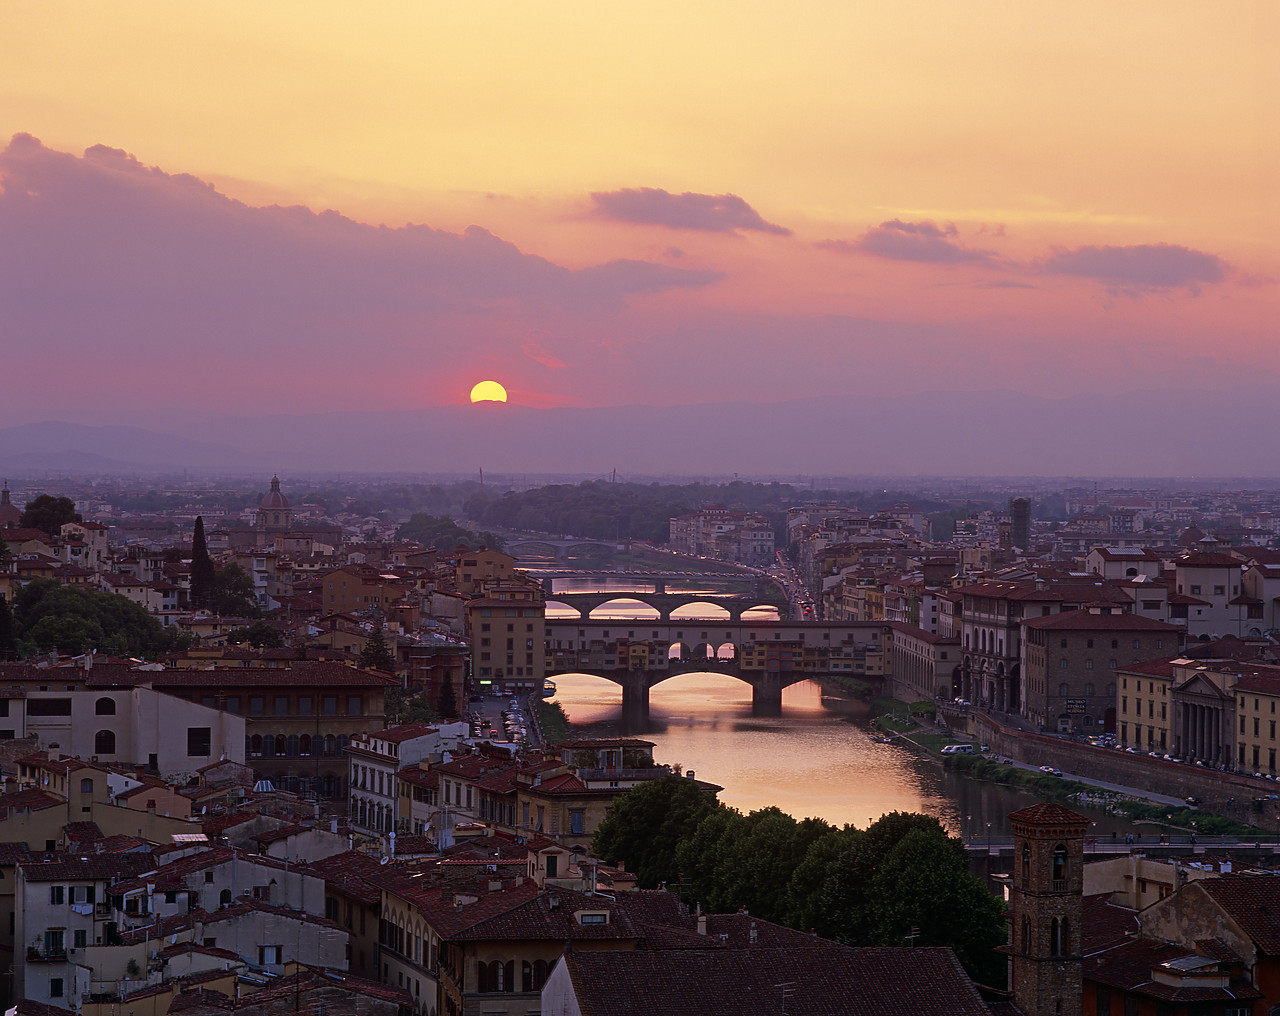 #020082-1 - Sunset over River Arno, Florence, Tuscany, Italy